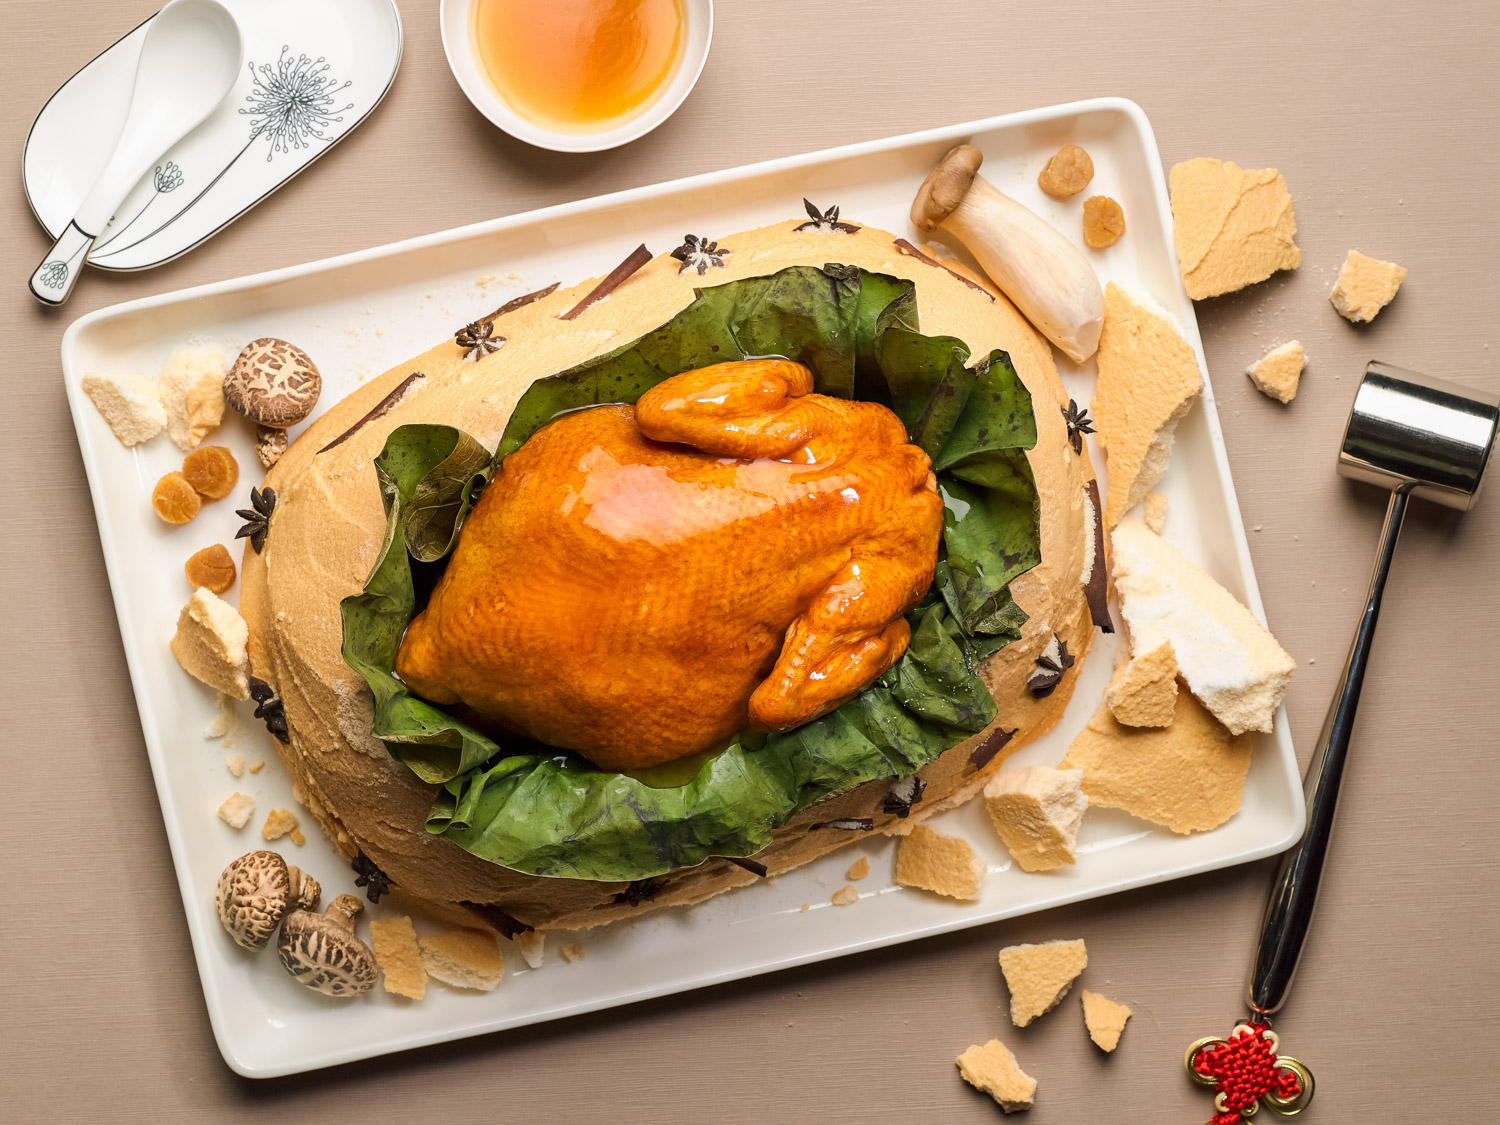 Salt-Crusted Traditional Stewed Chicken with Dried Scallops in Lotus Leaf ( 荷香元贝富贵鸡 )